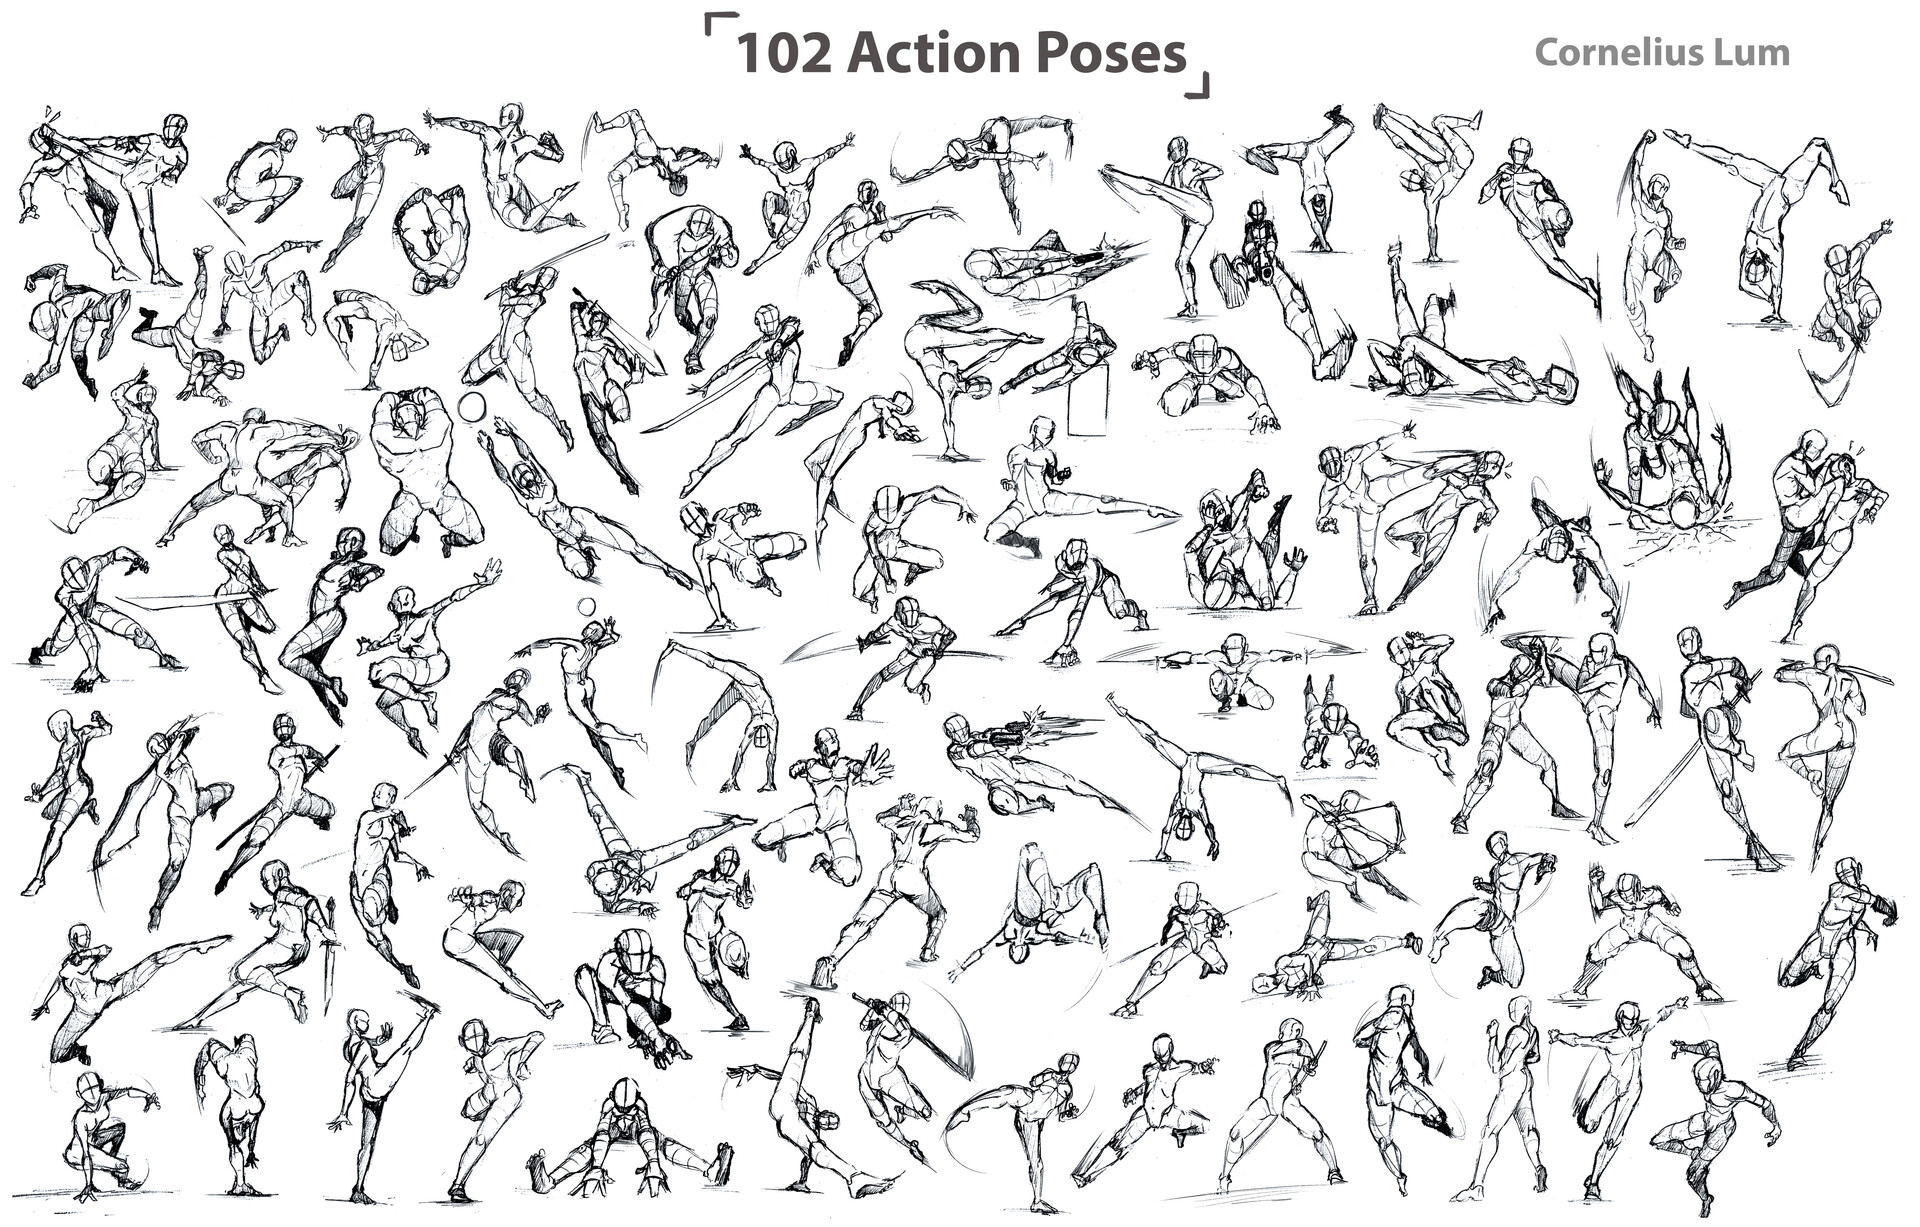 3 free websites to practice drawing poses and figures | The Art and Beyond